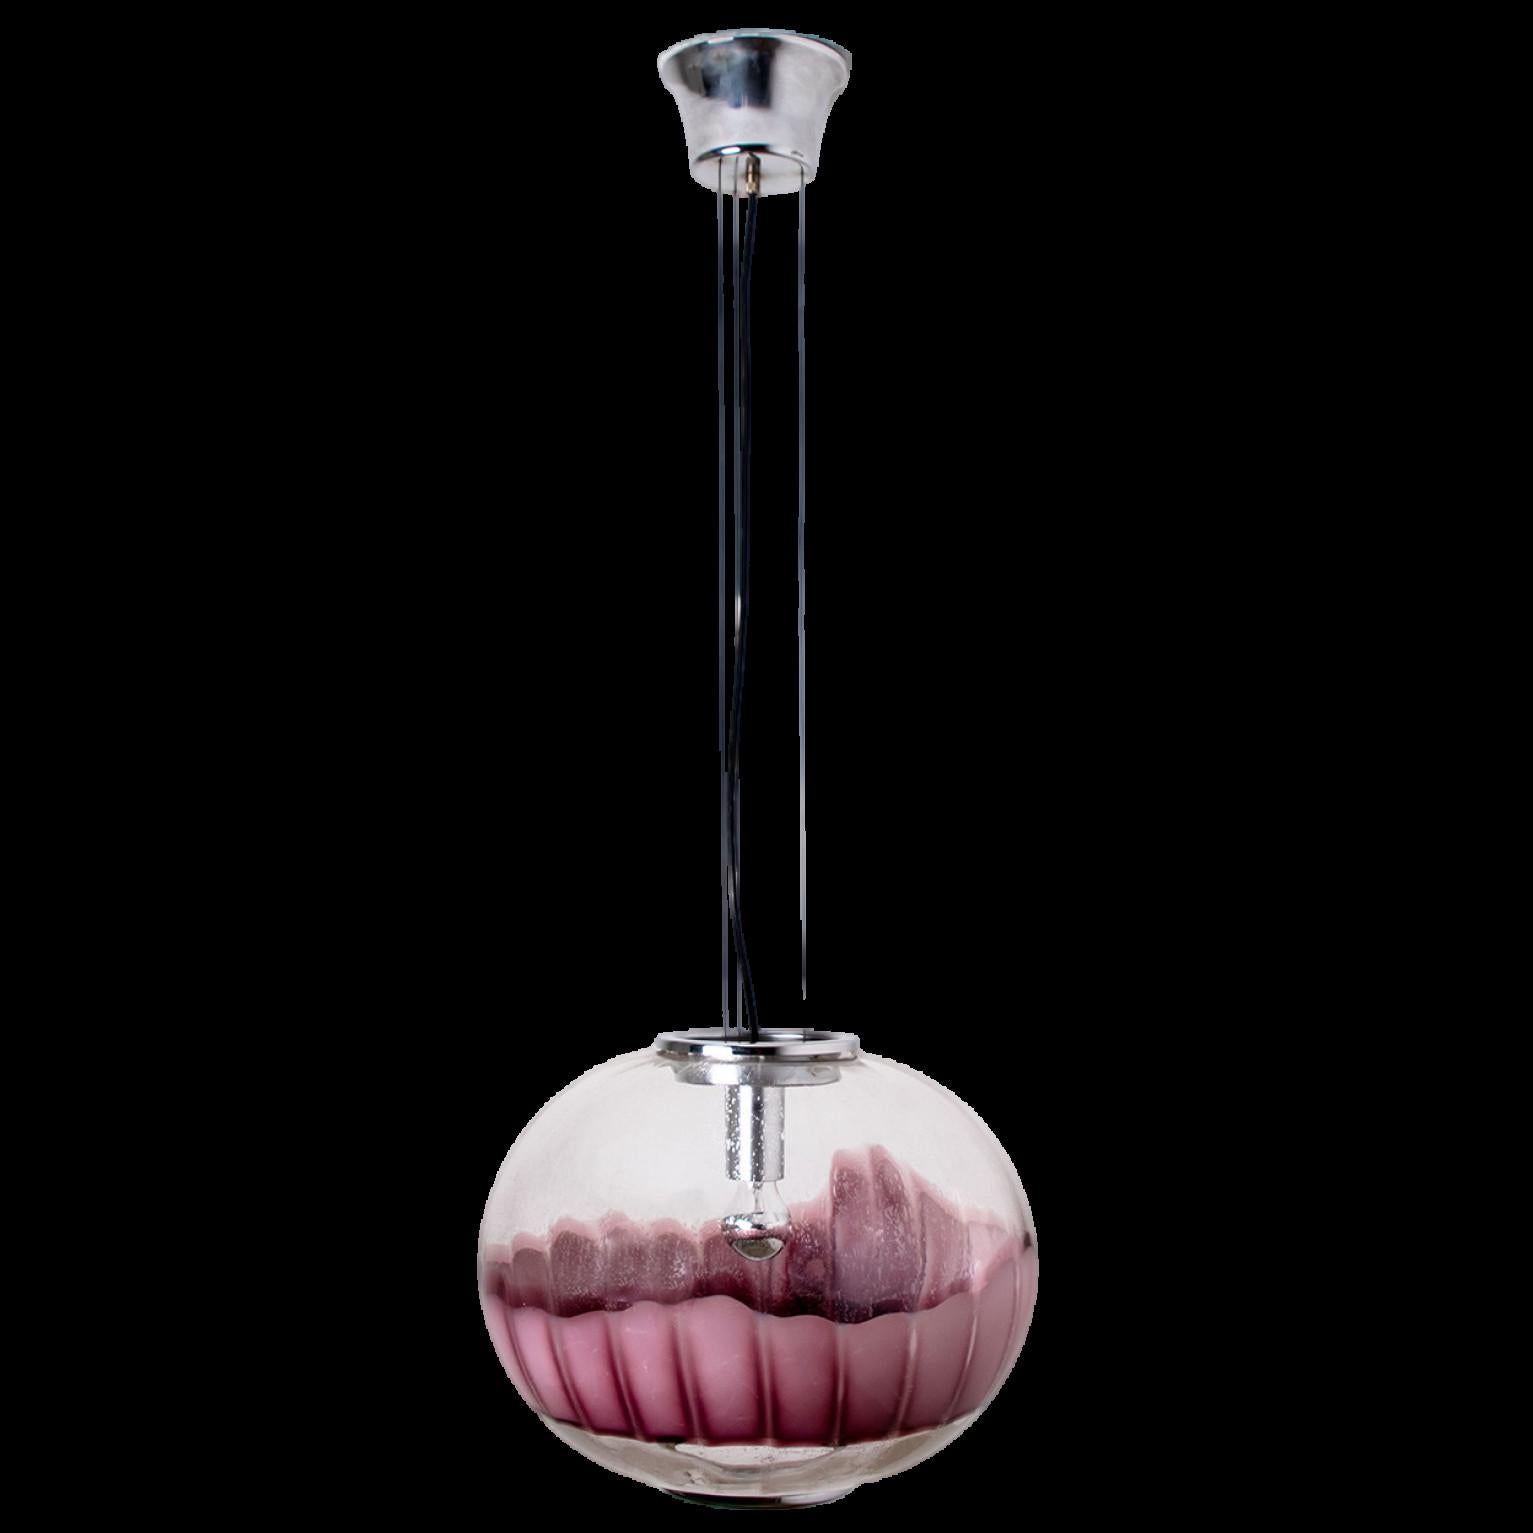 A beautiful and unique pendant light by Mazzega, Italy.
Blown clear and aubergine colored murano glass and a chrome base and finish compose this beautiful piece.

Measures: H 27.24” (120 cm), D 19.70